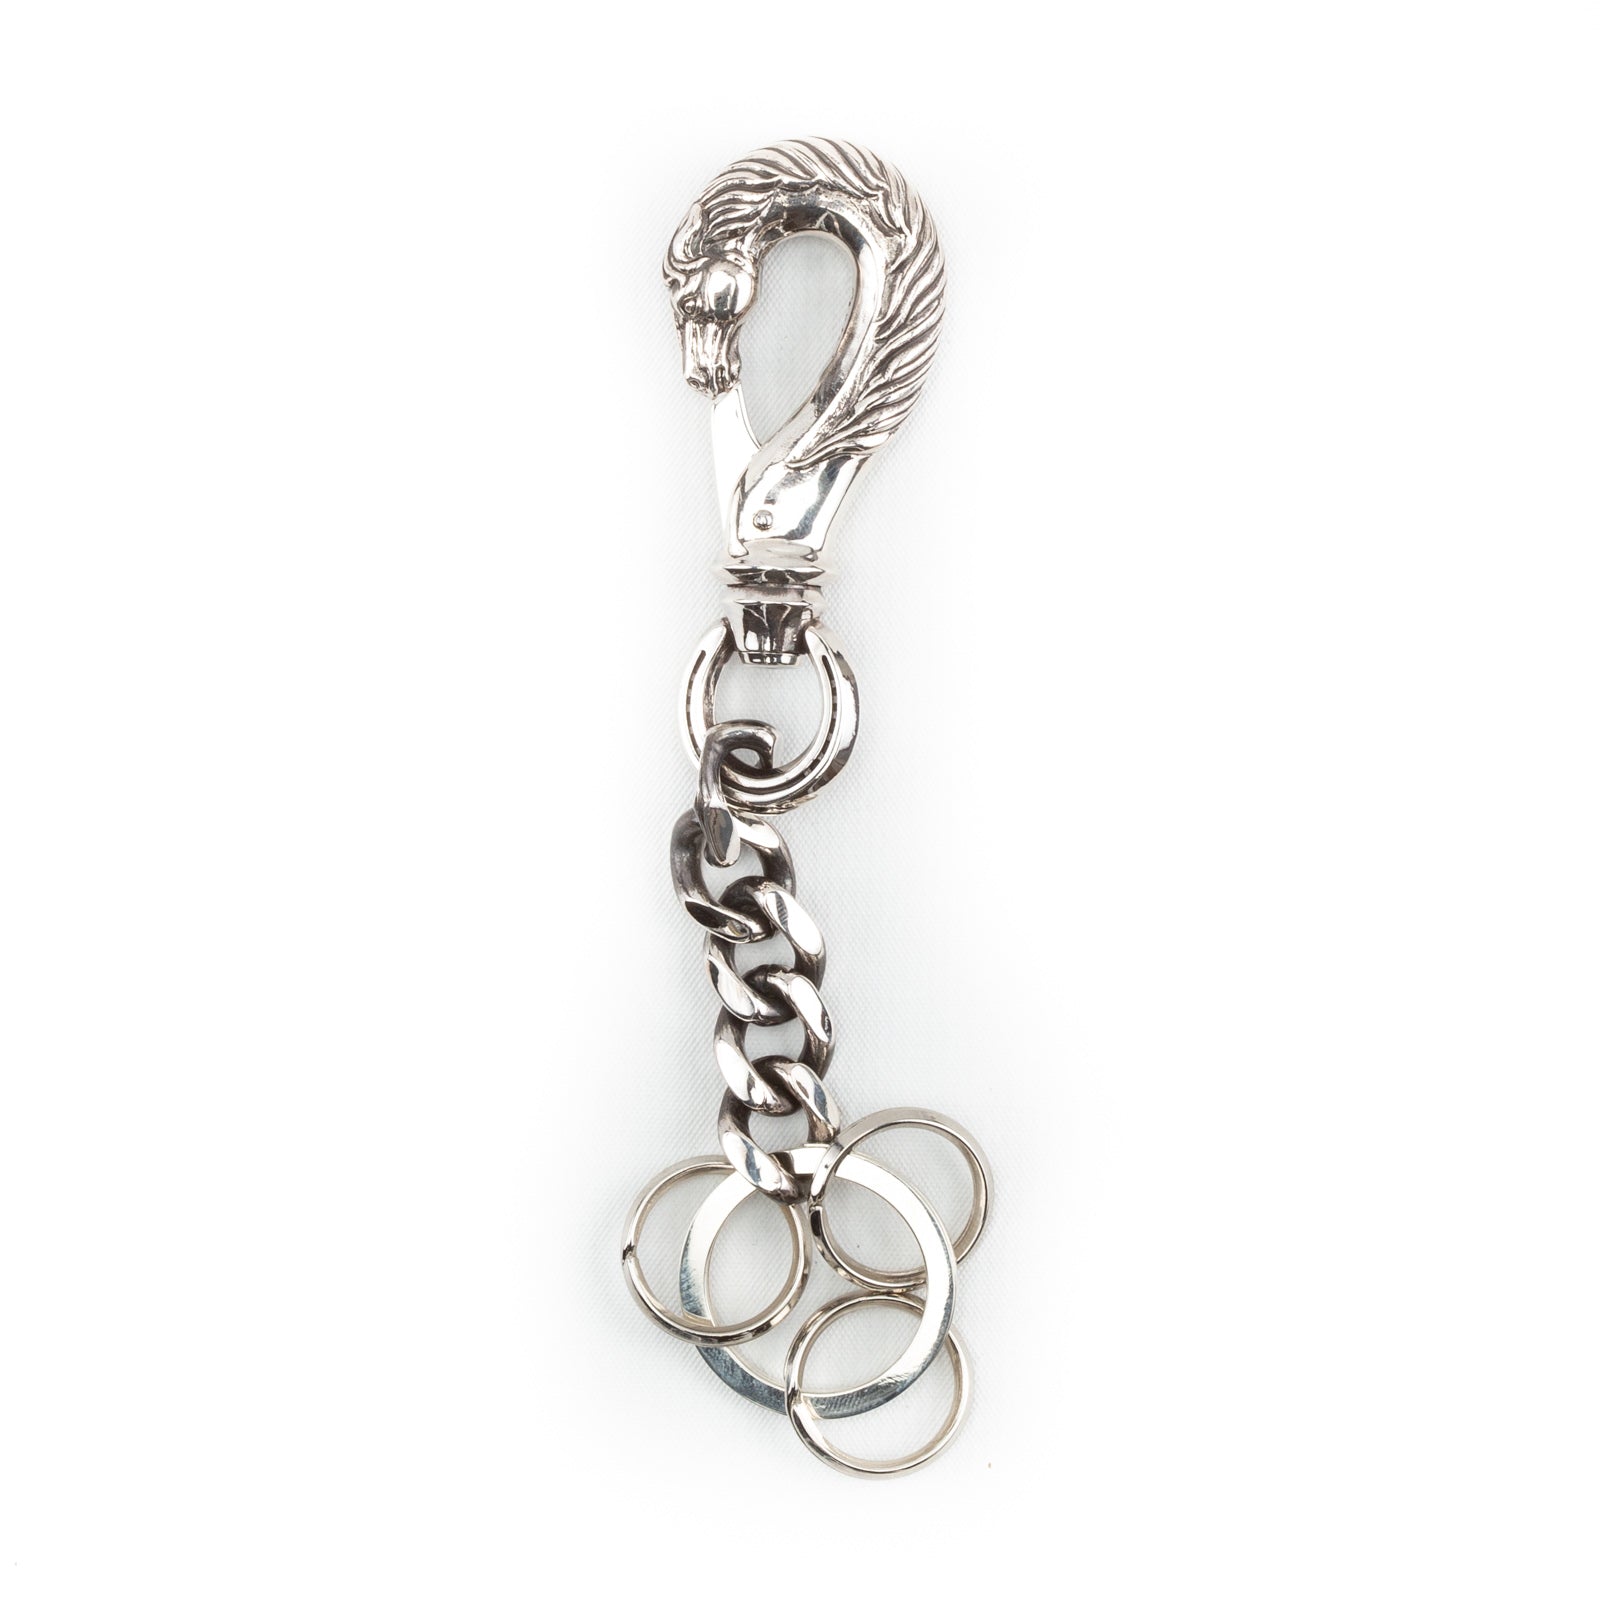 Silvertraits Wallet Key Chain with Handcrafted Beads in Sterling Silver